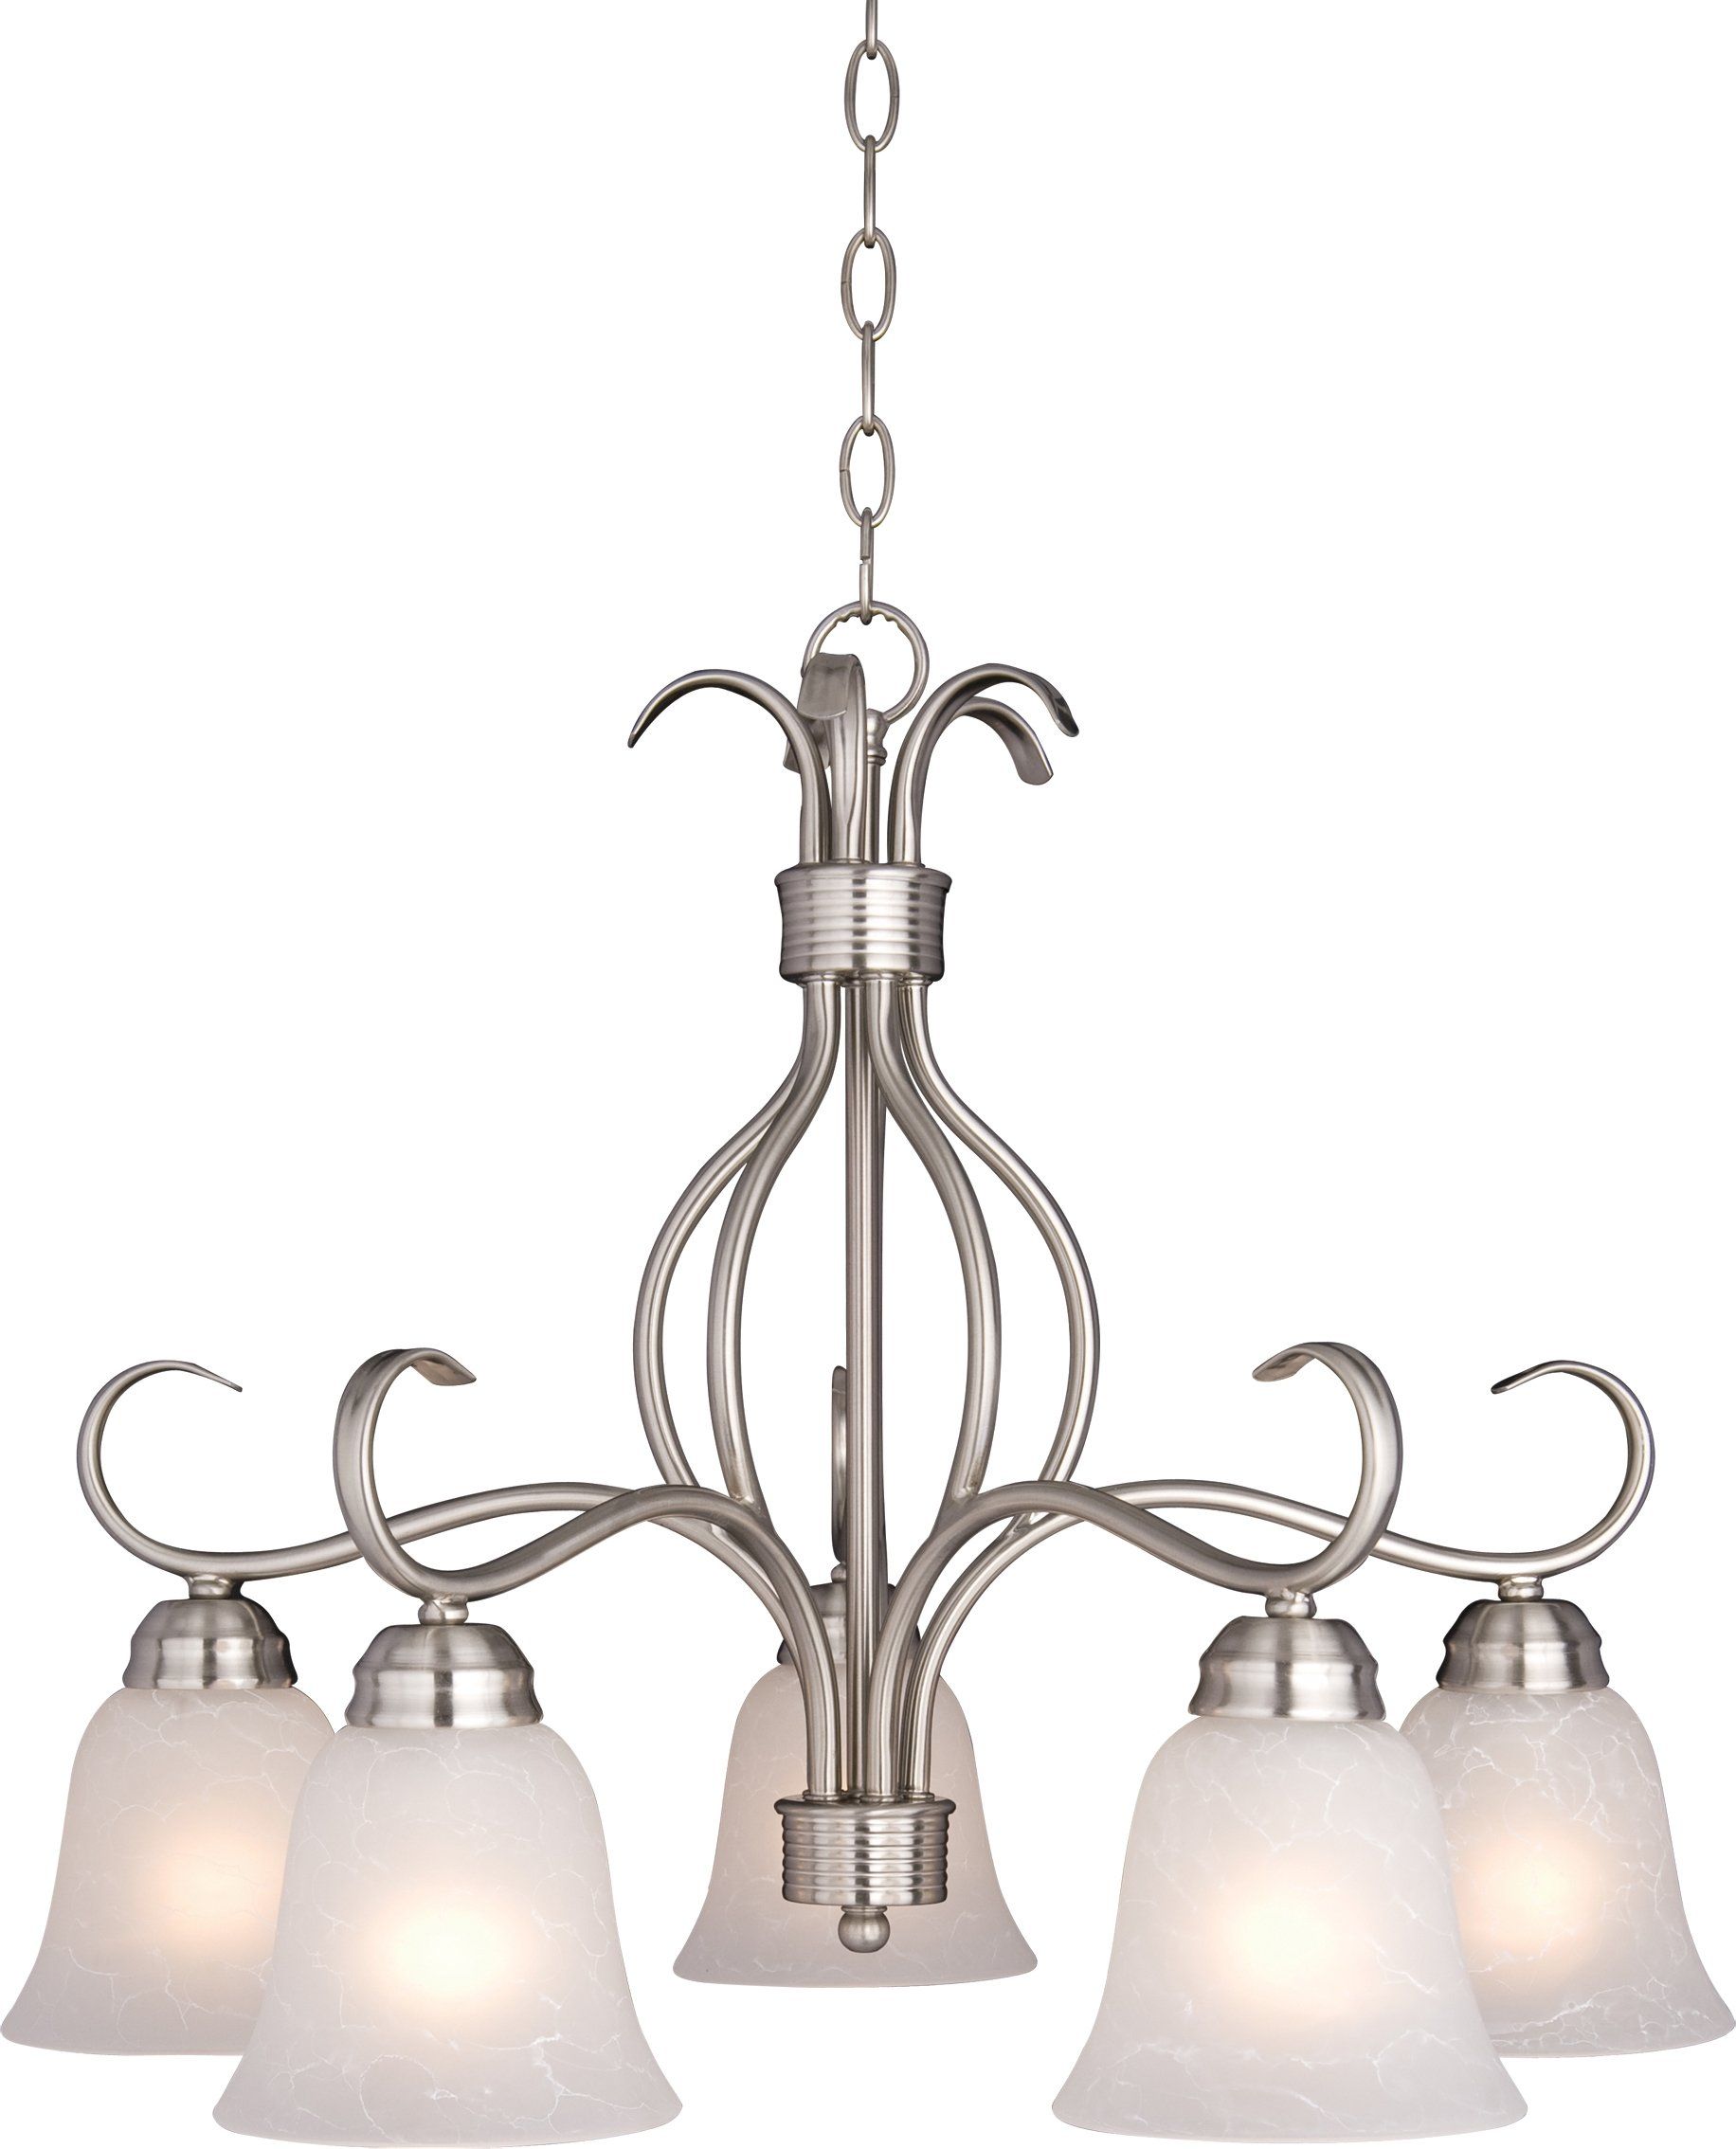 Wehr 5 Light Shaded Chandelier With Newent 5 Light Shaded Chandeliers (View 11 of 30)